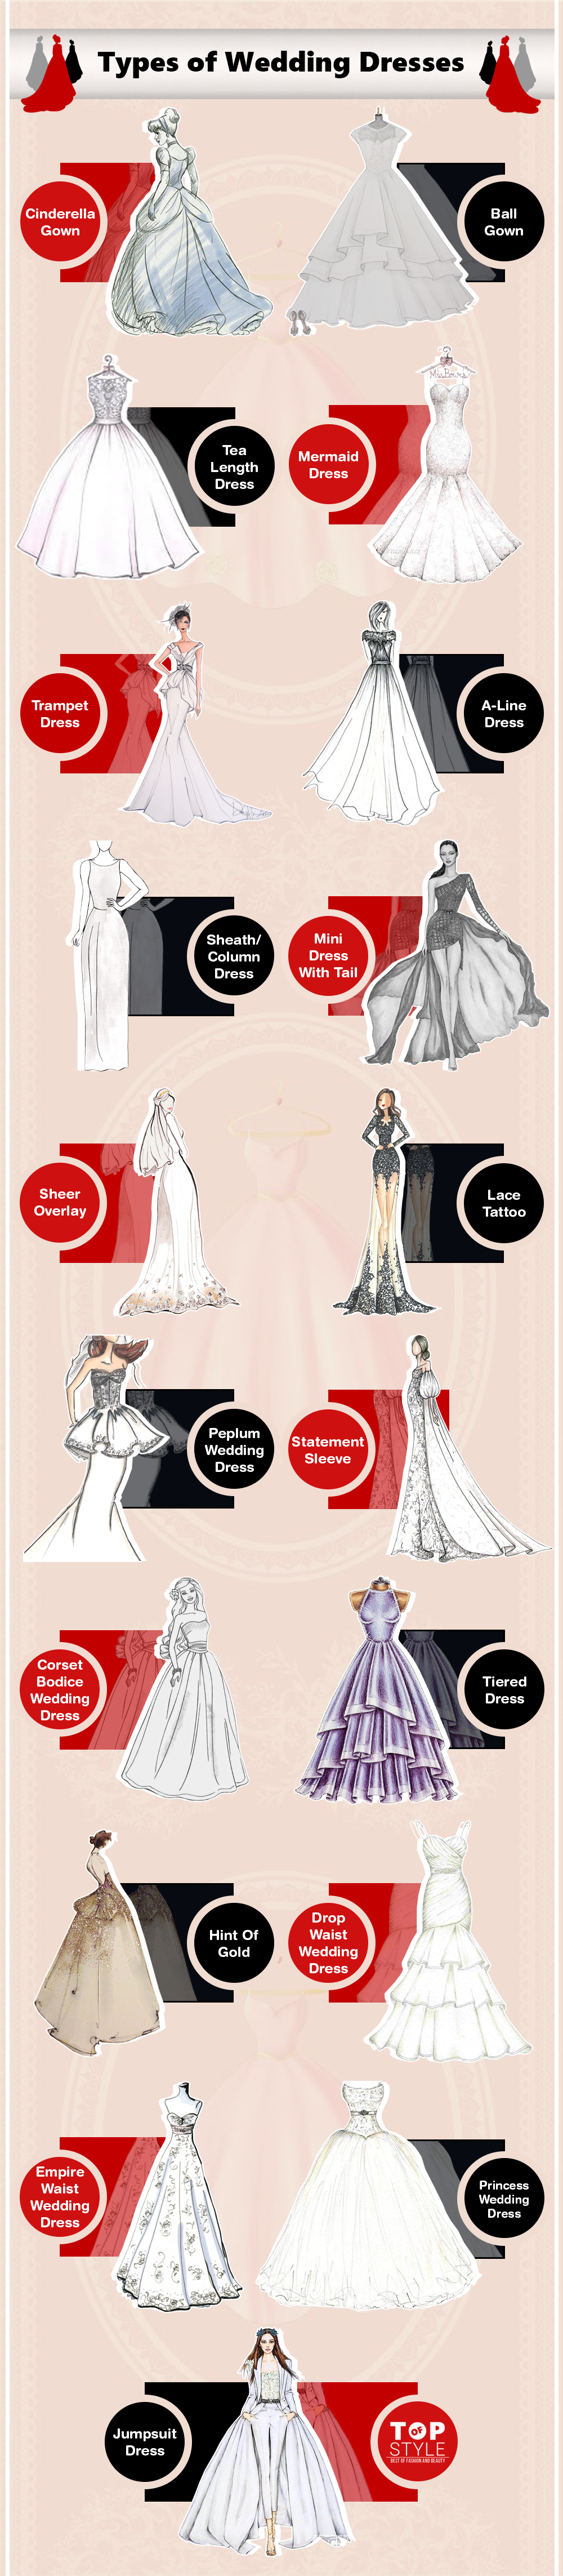 19 Different Types of Wedding Dresses Every Bridal Need to Know